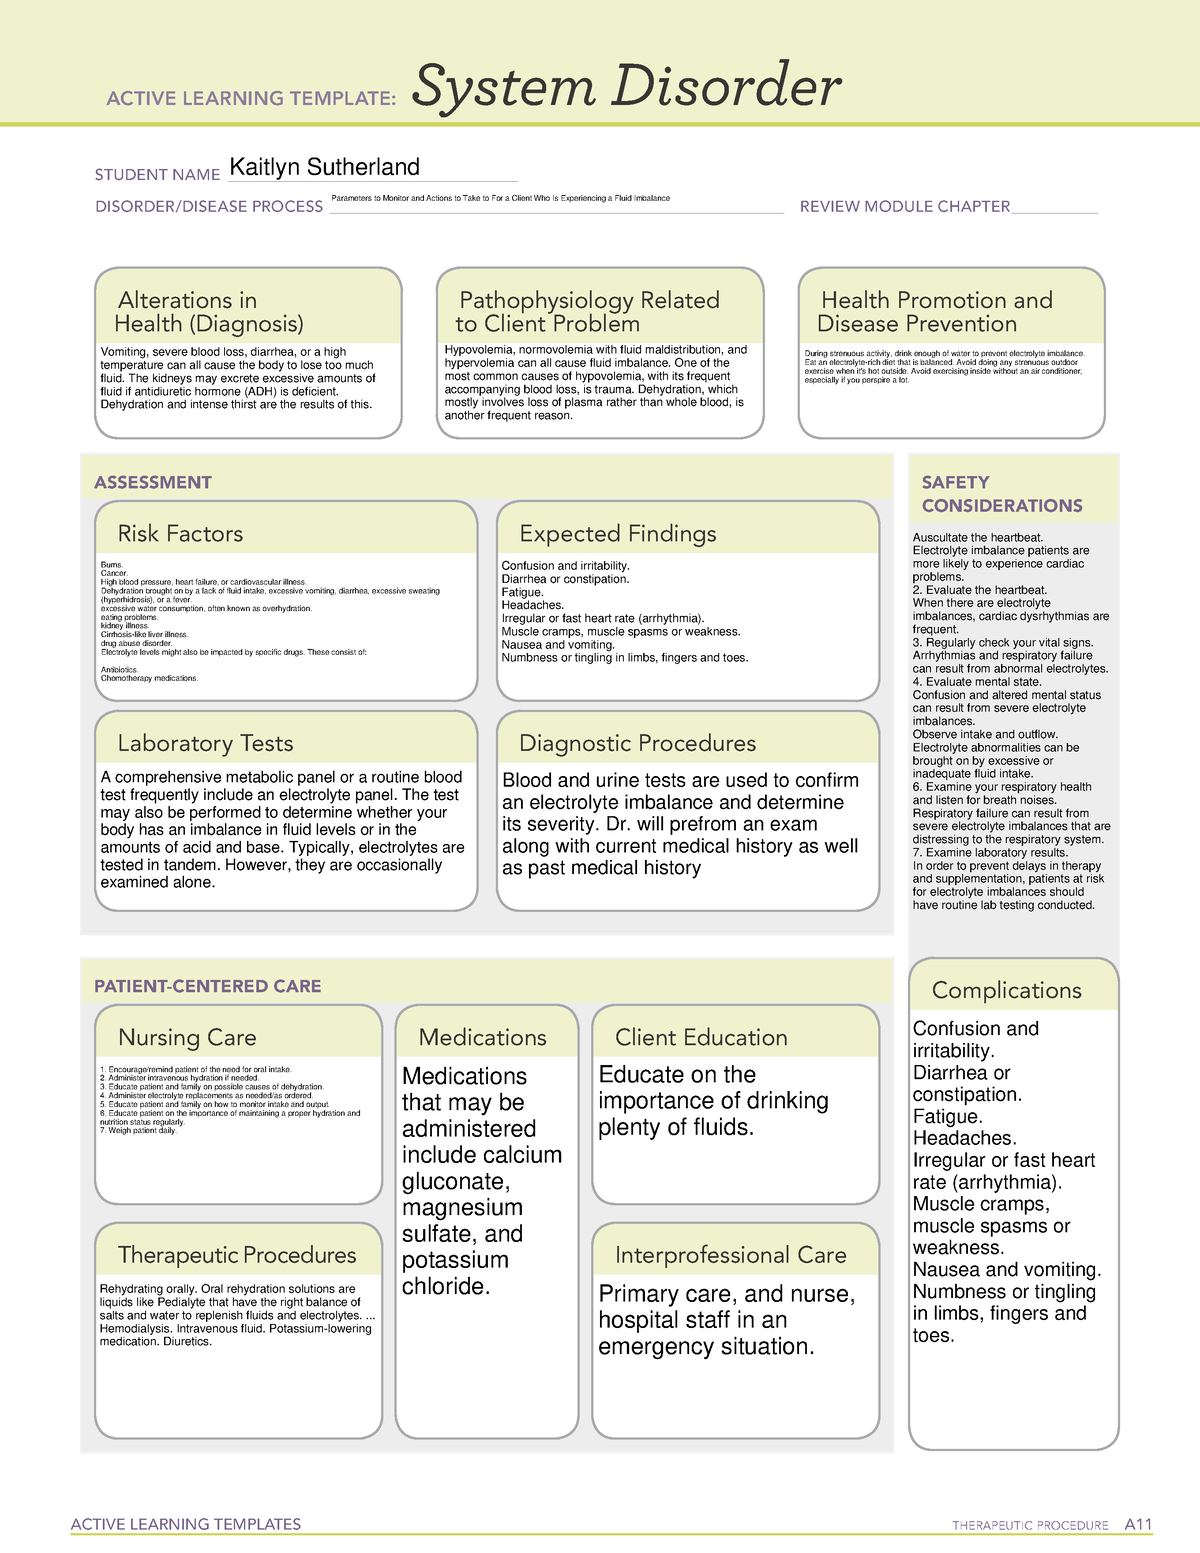 System disorder fluid imbalance ACTIVE LEARNING TEMPLATES